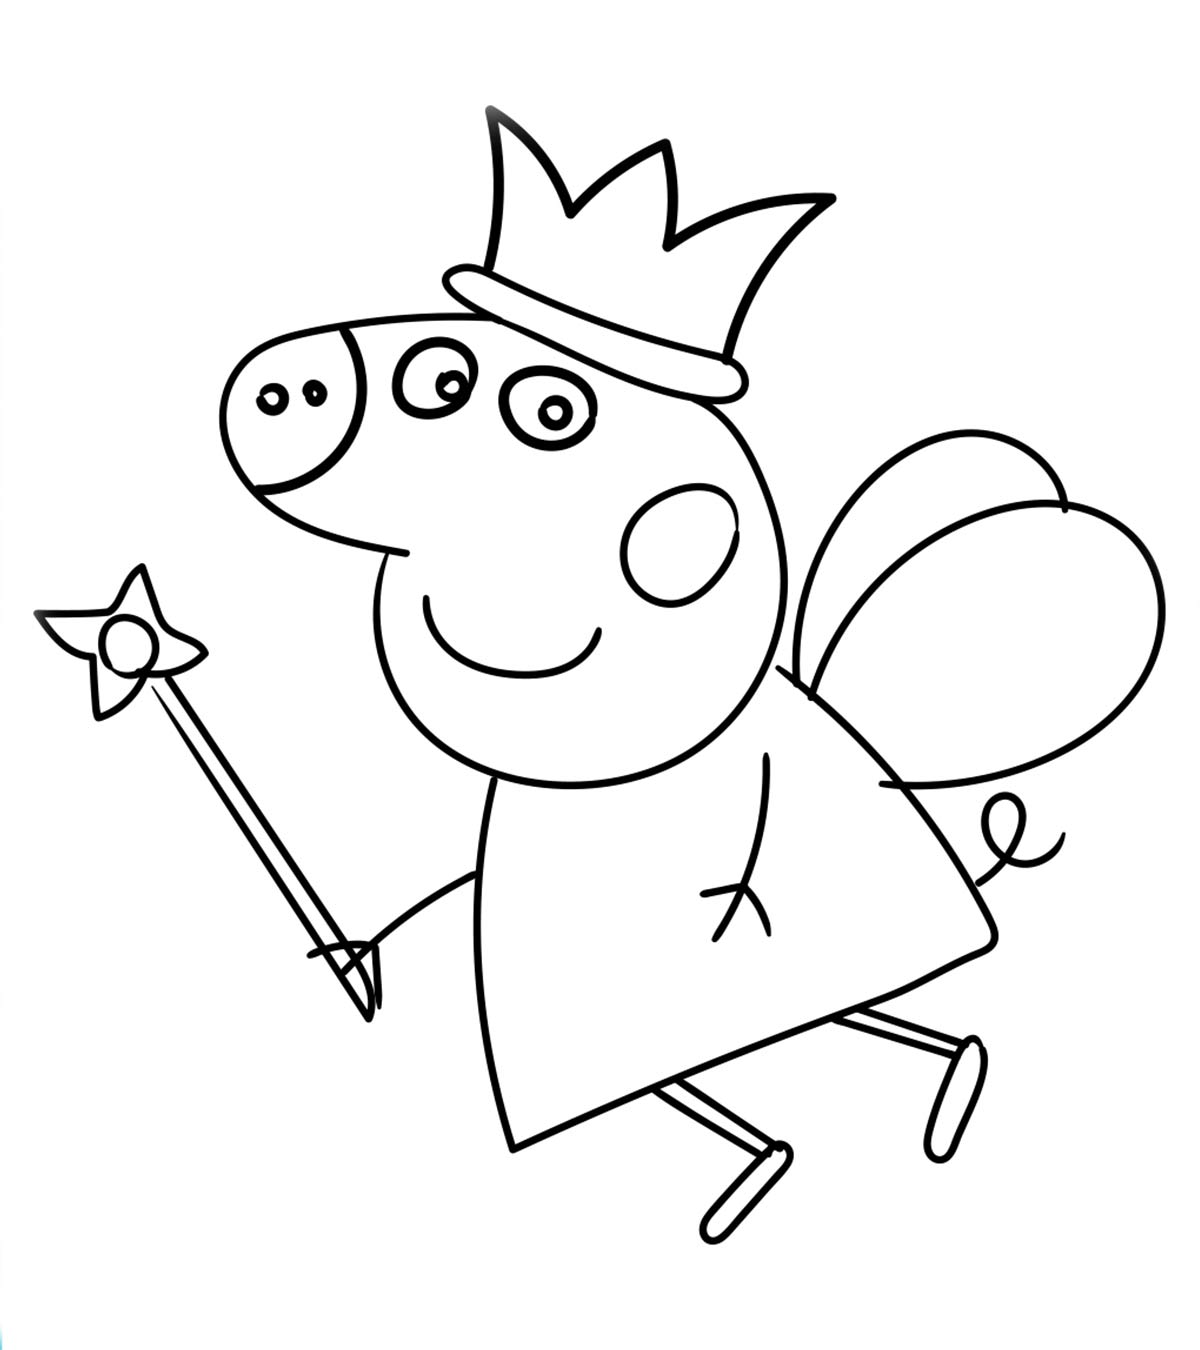 Cartoon Coloring Pages - MomJunction